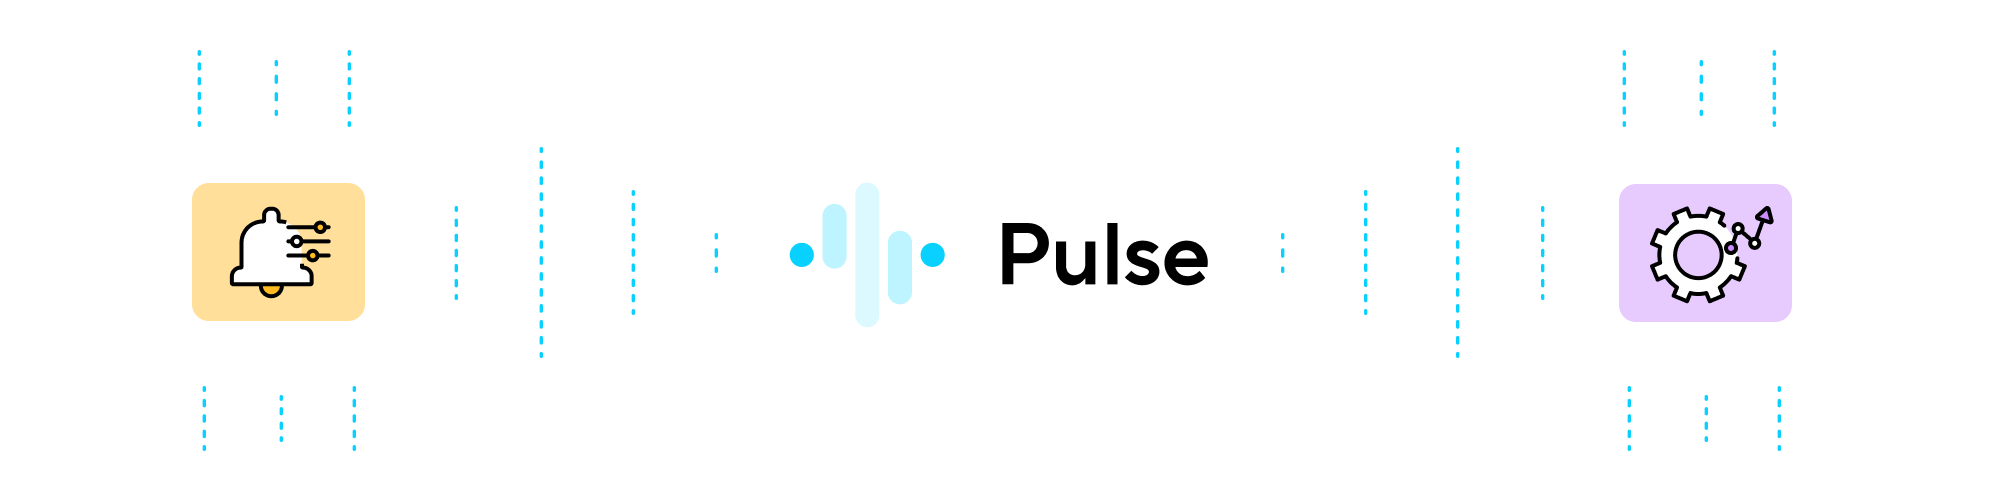 A banner image showing icons related to Pulse.